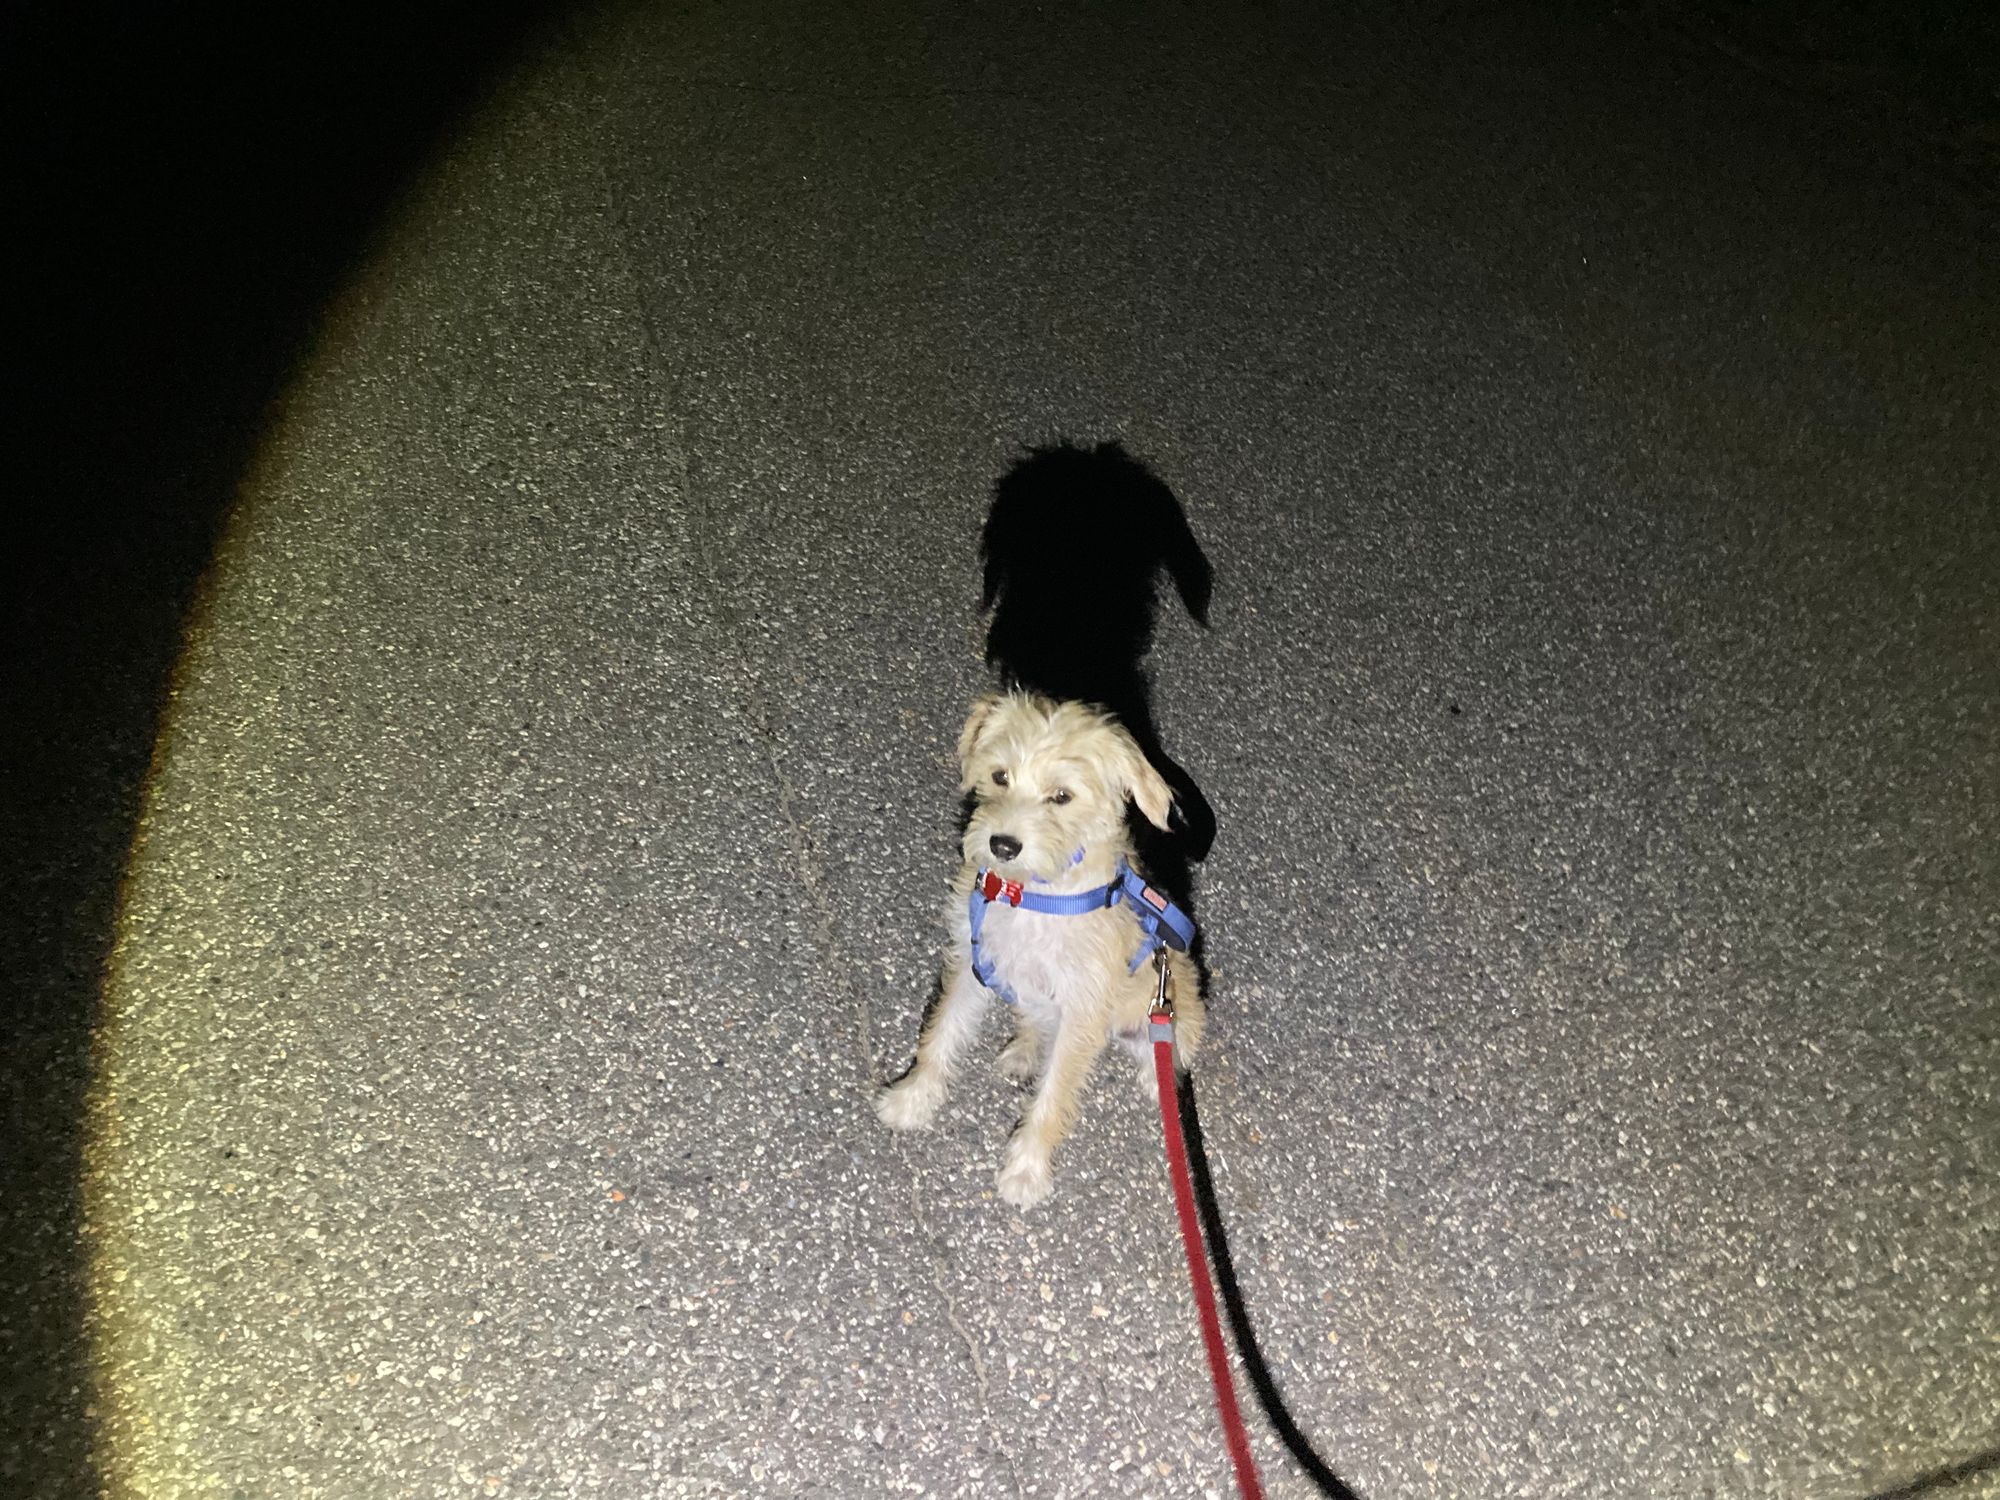 Stiva sitting on an empty street in the dark harnessed to a red leash.